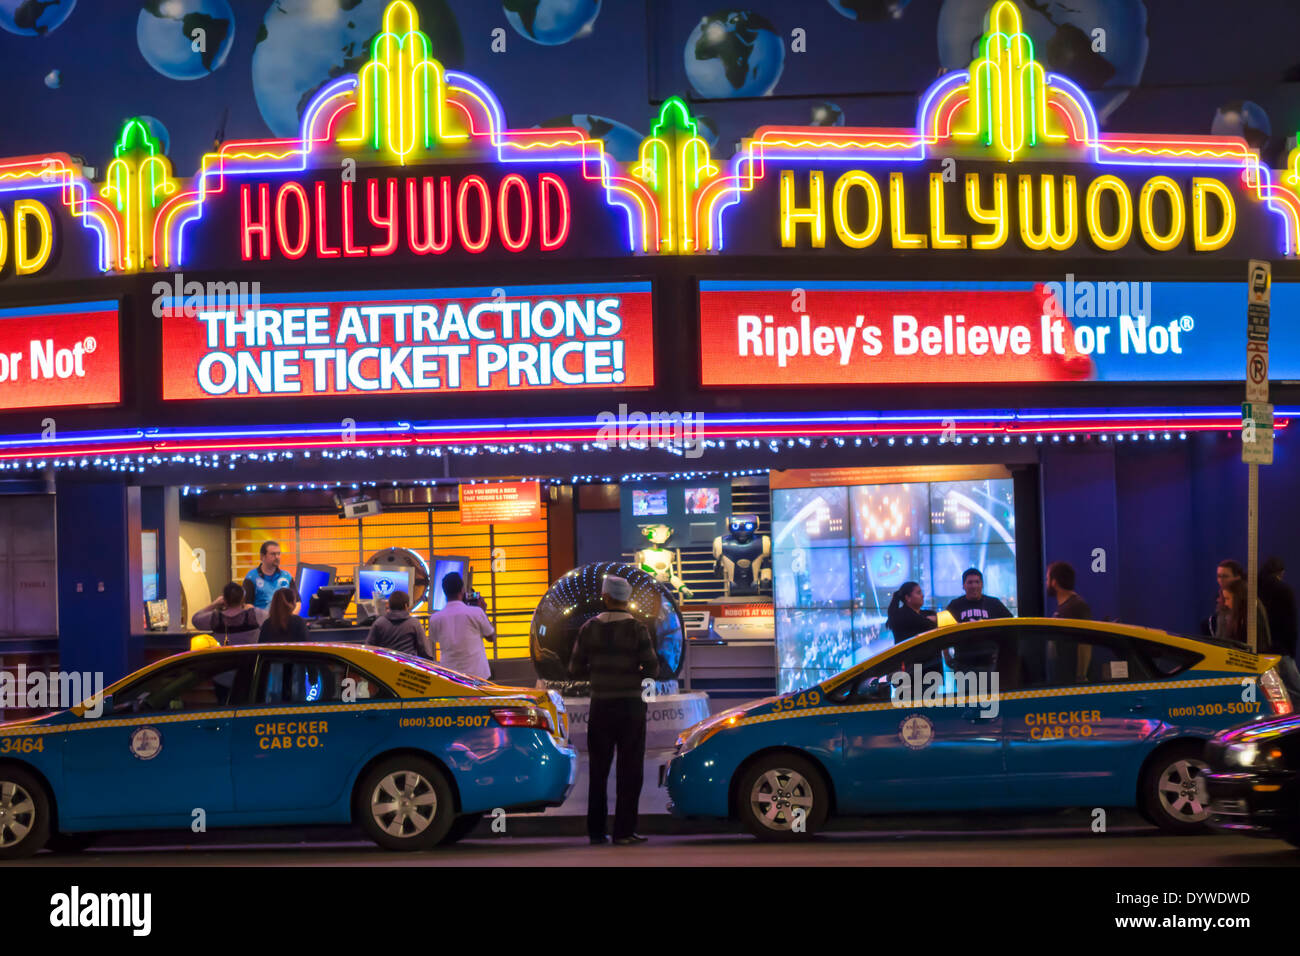 Los Angeles California,LA,Hollywood Boulevard,movie industry,Hollywood Walk of Fame,Ripley's Believe it or Not,museum,neon,sign,marquee,entrance,taxi, Stock Photo